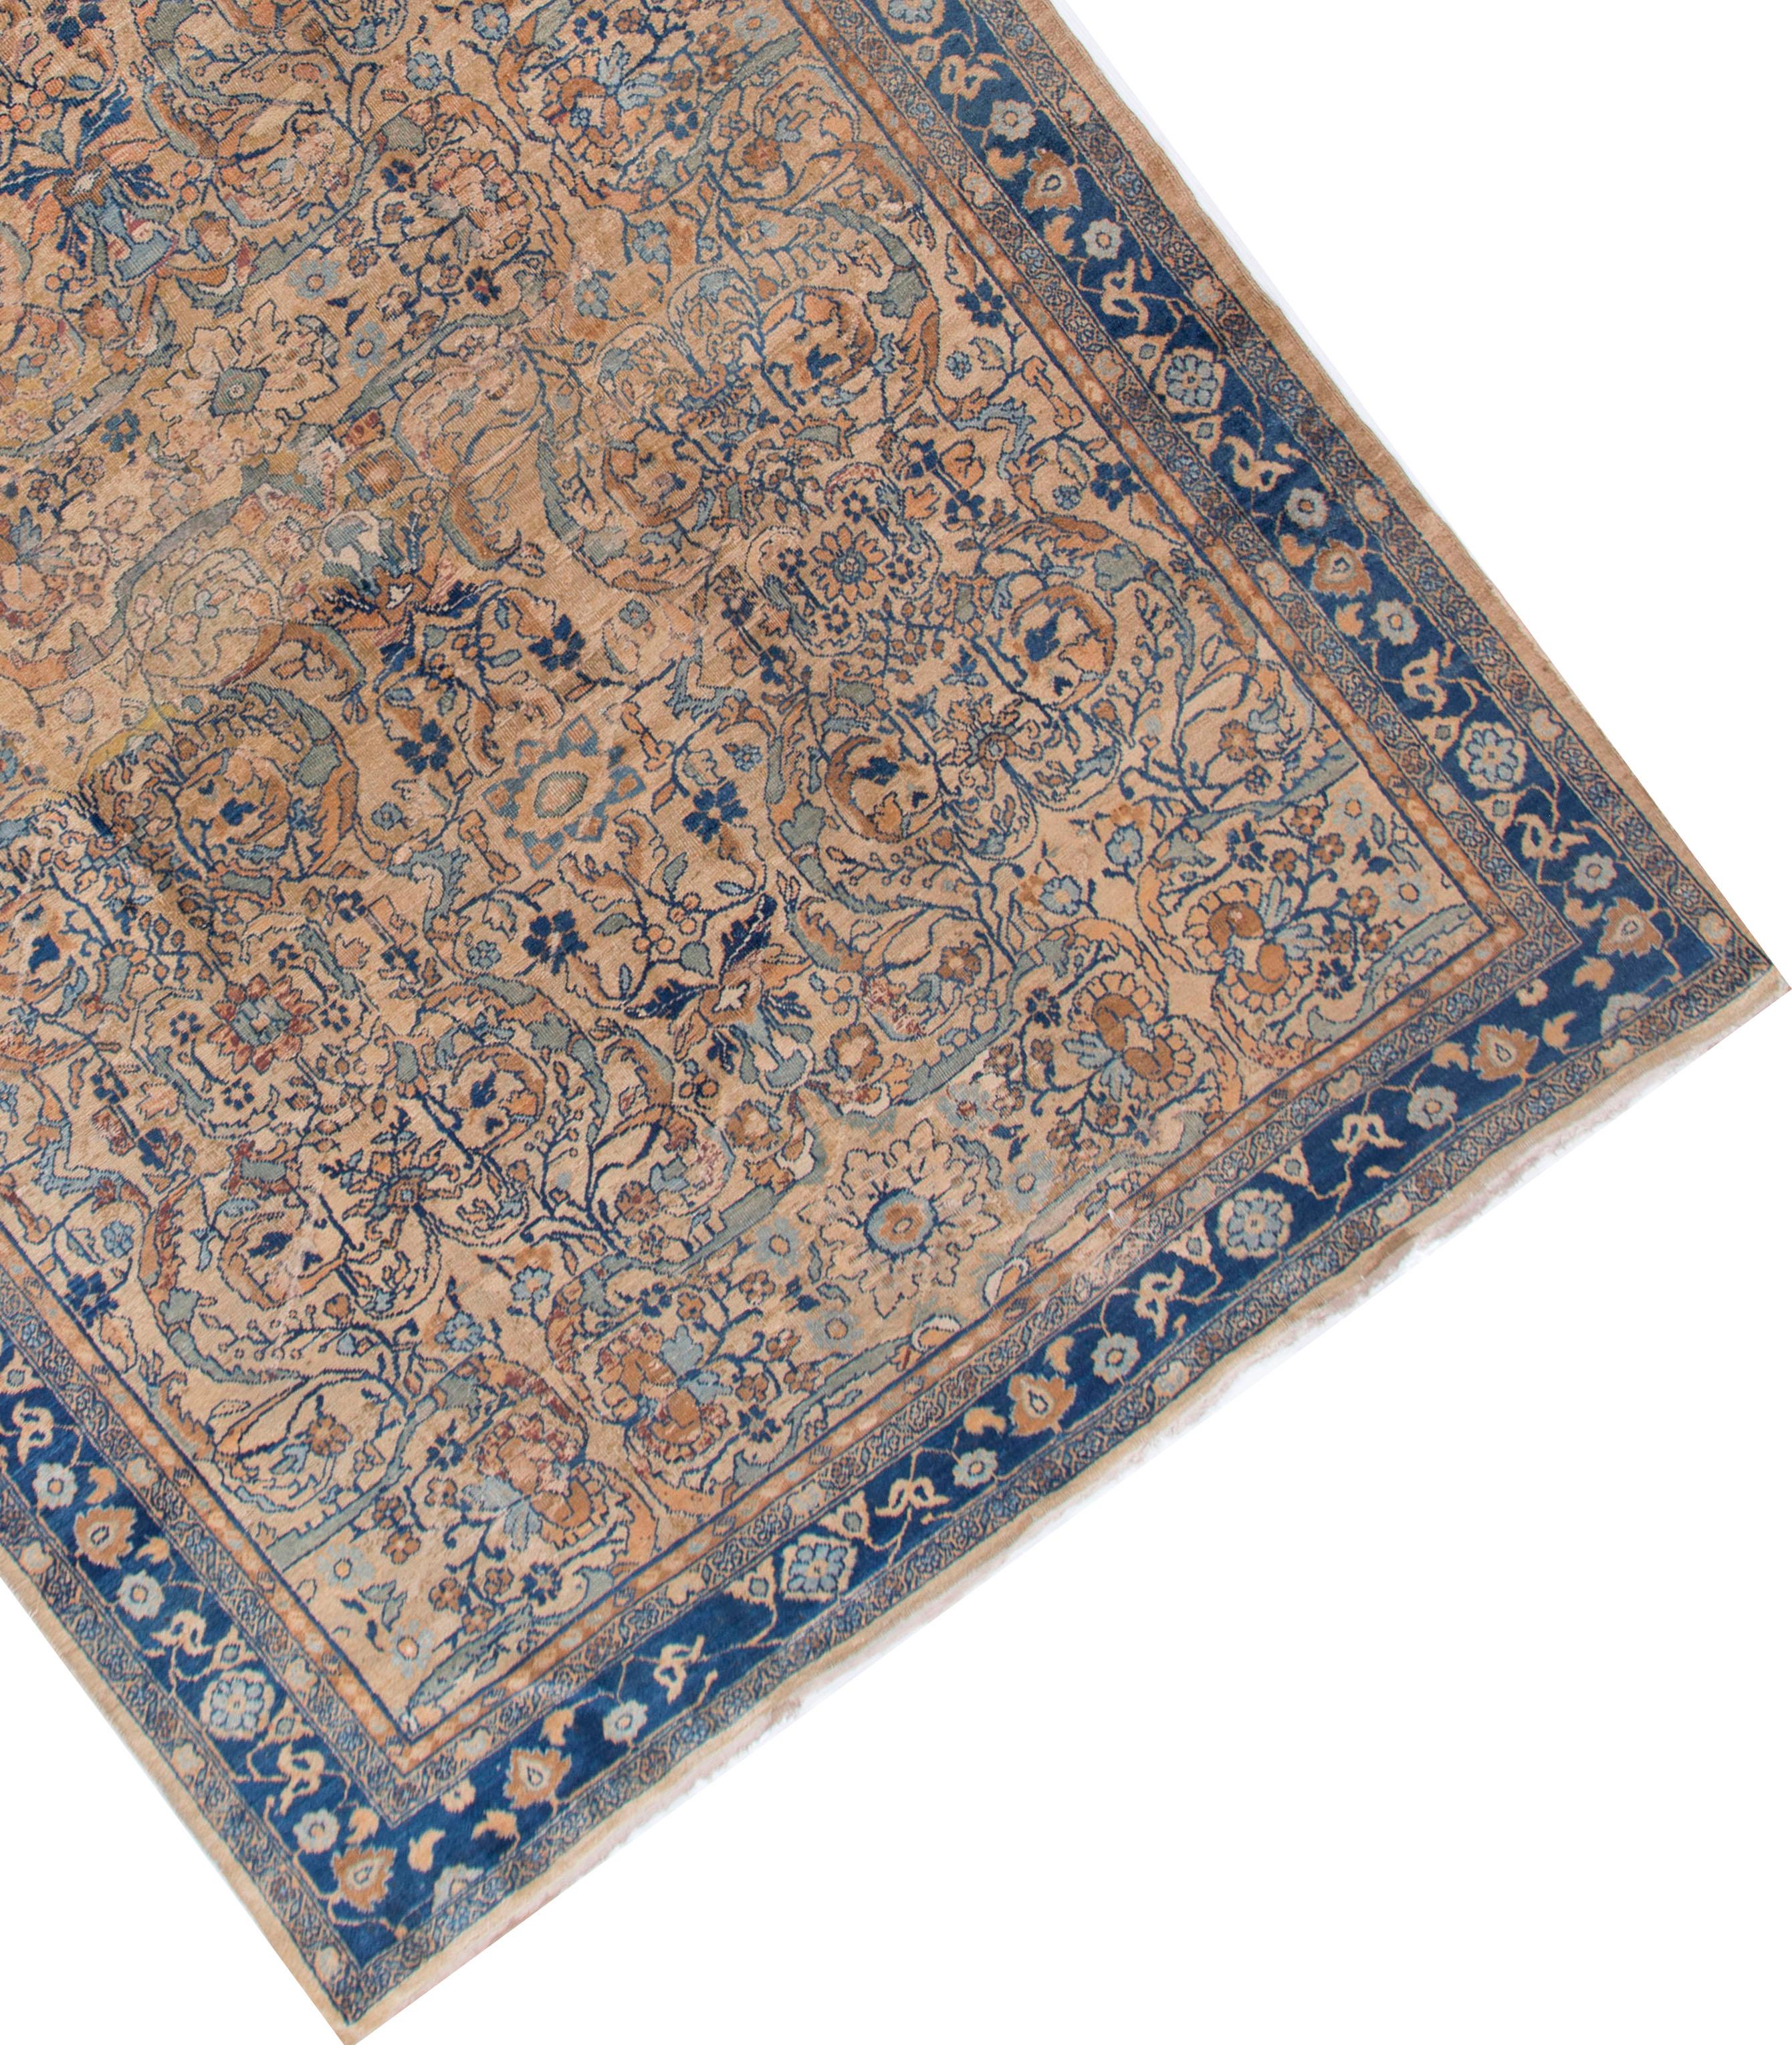 Hand-Woven Antique Persian Feraghan Rug, circa 1890, 7'9 x 11'3 For Sale